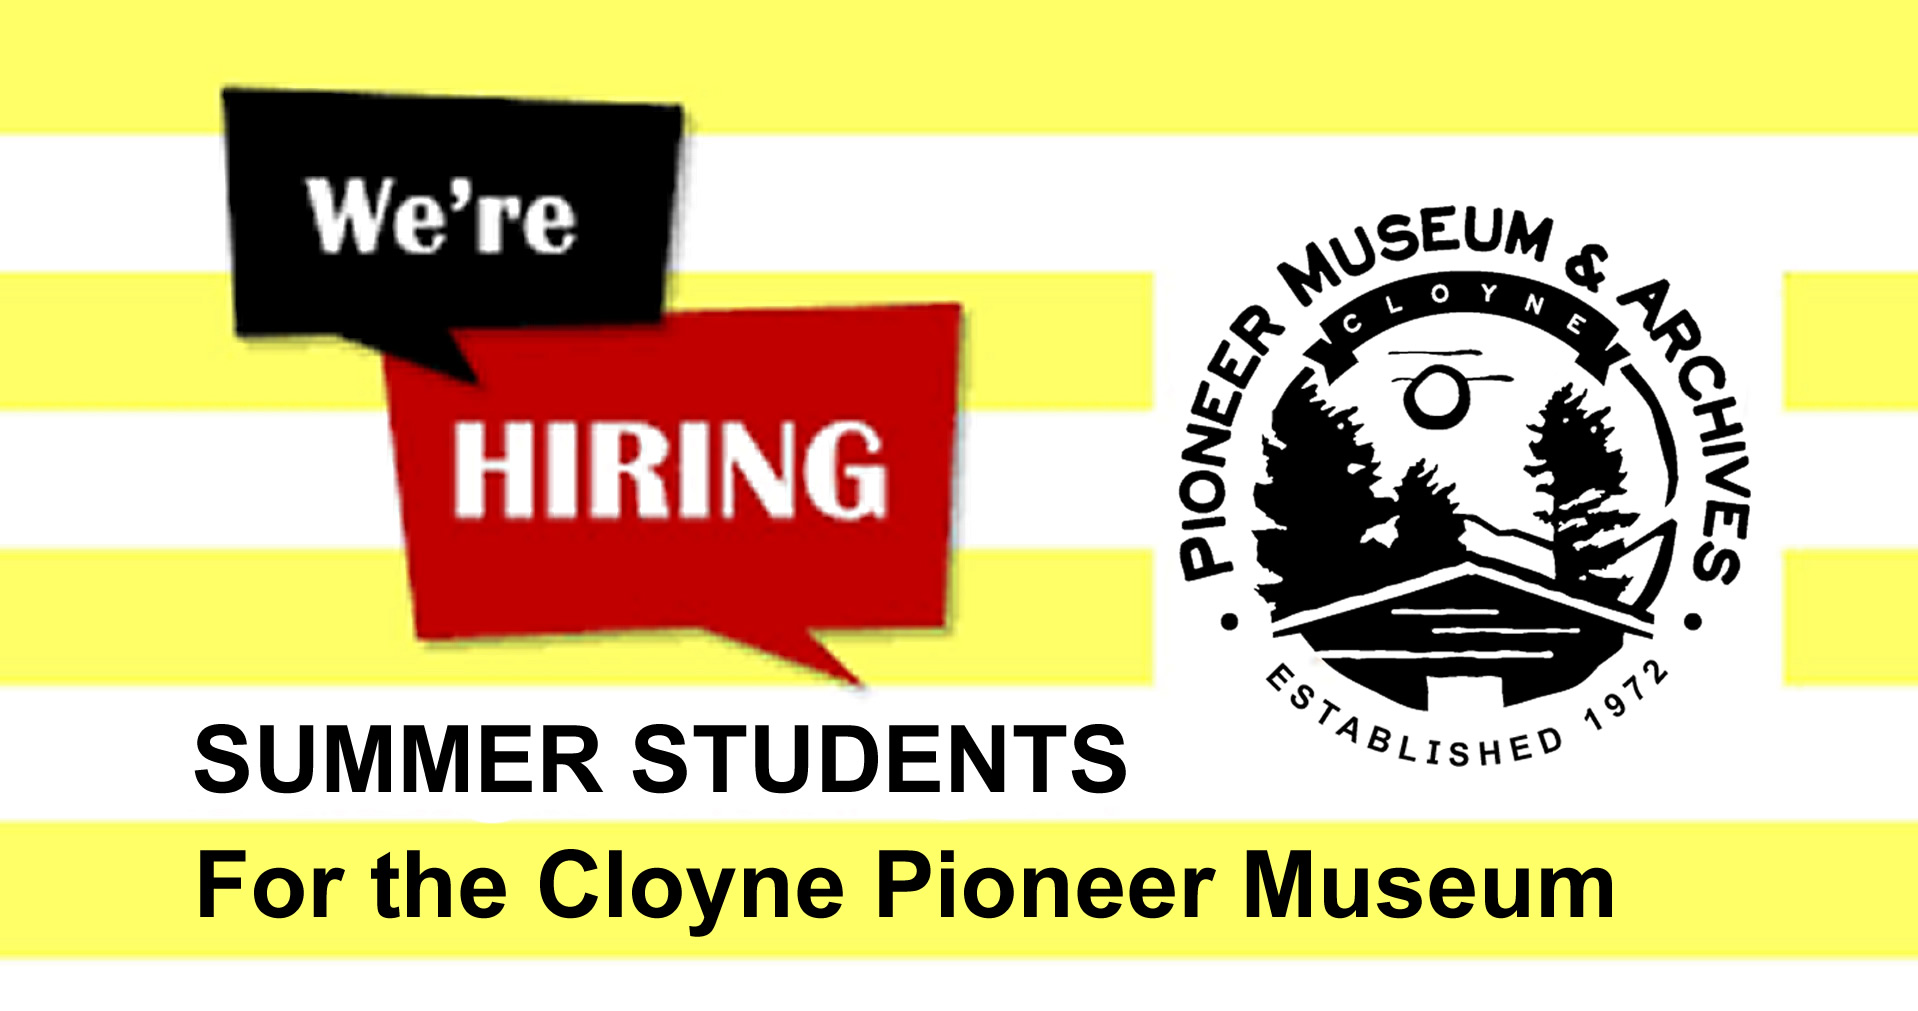 CDHS is hiring summer students for the Cloyne Pioneer Museum in 2023.